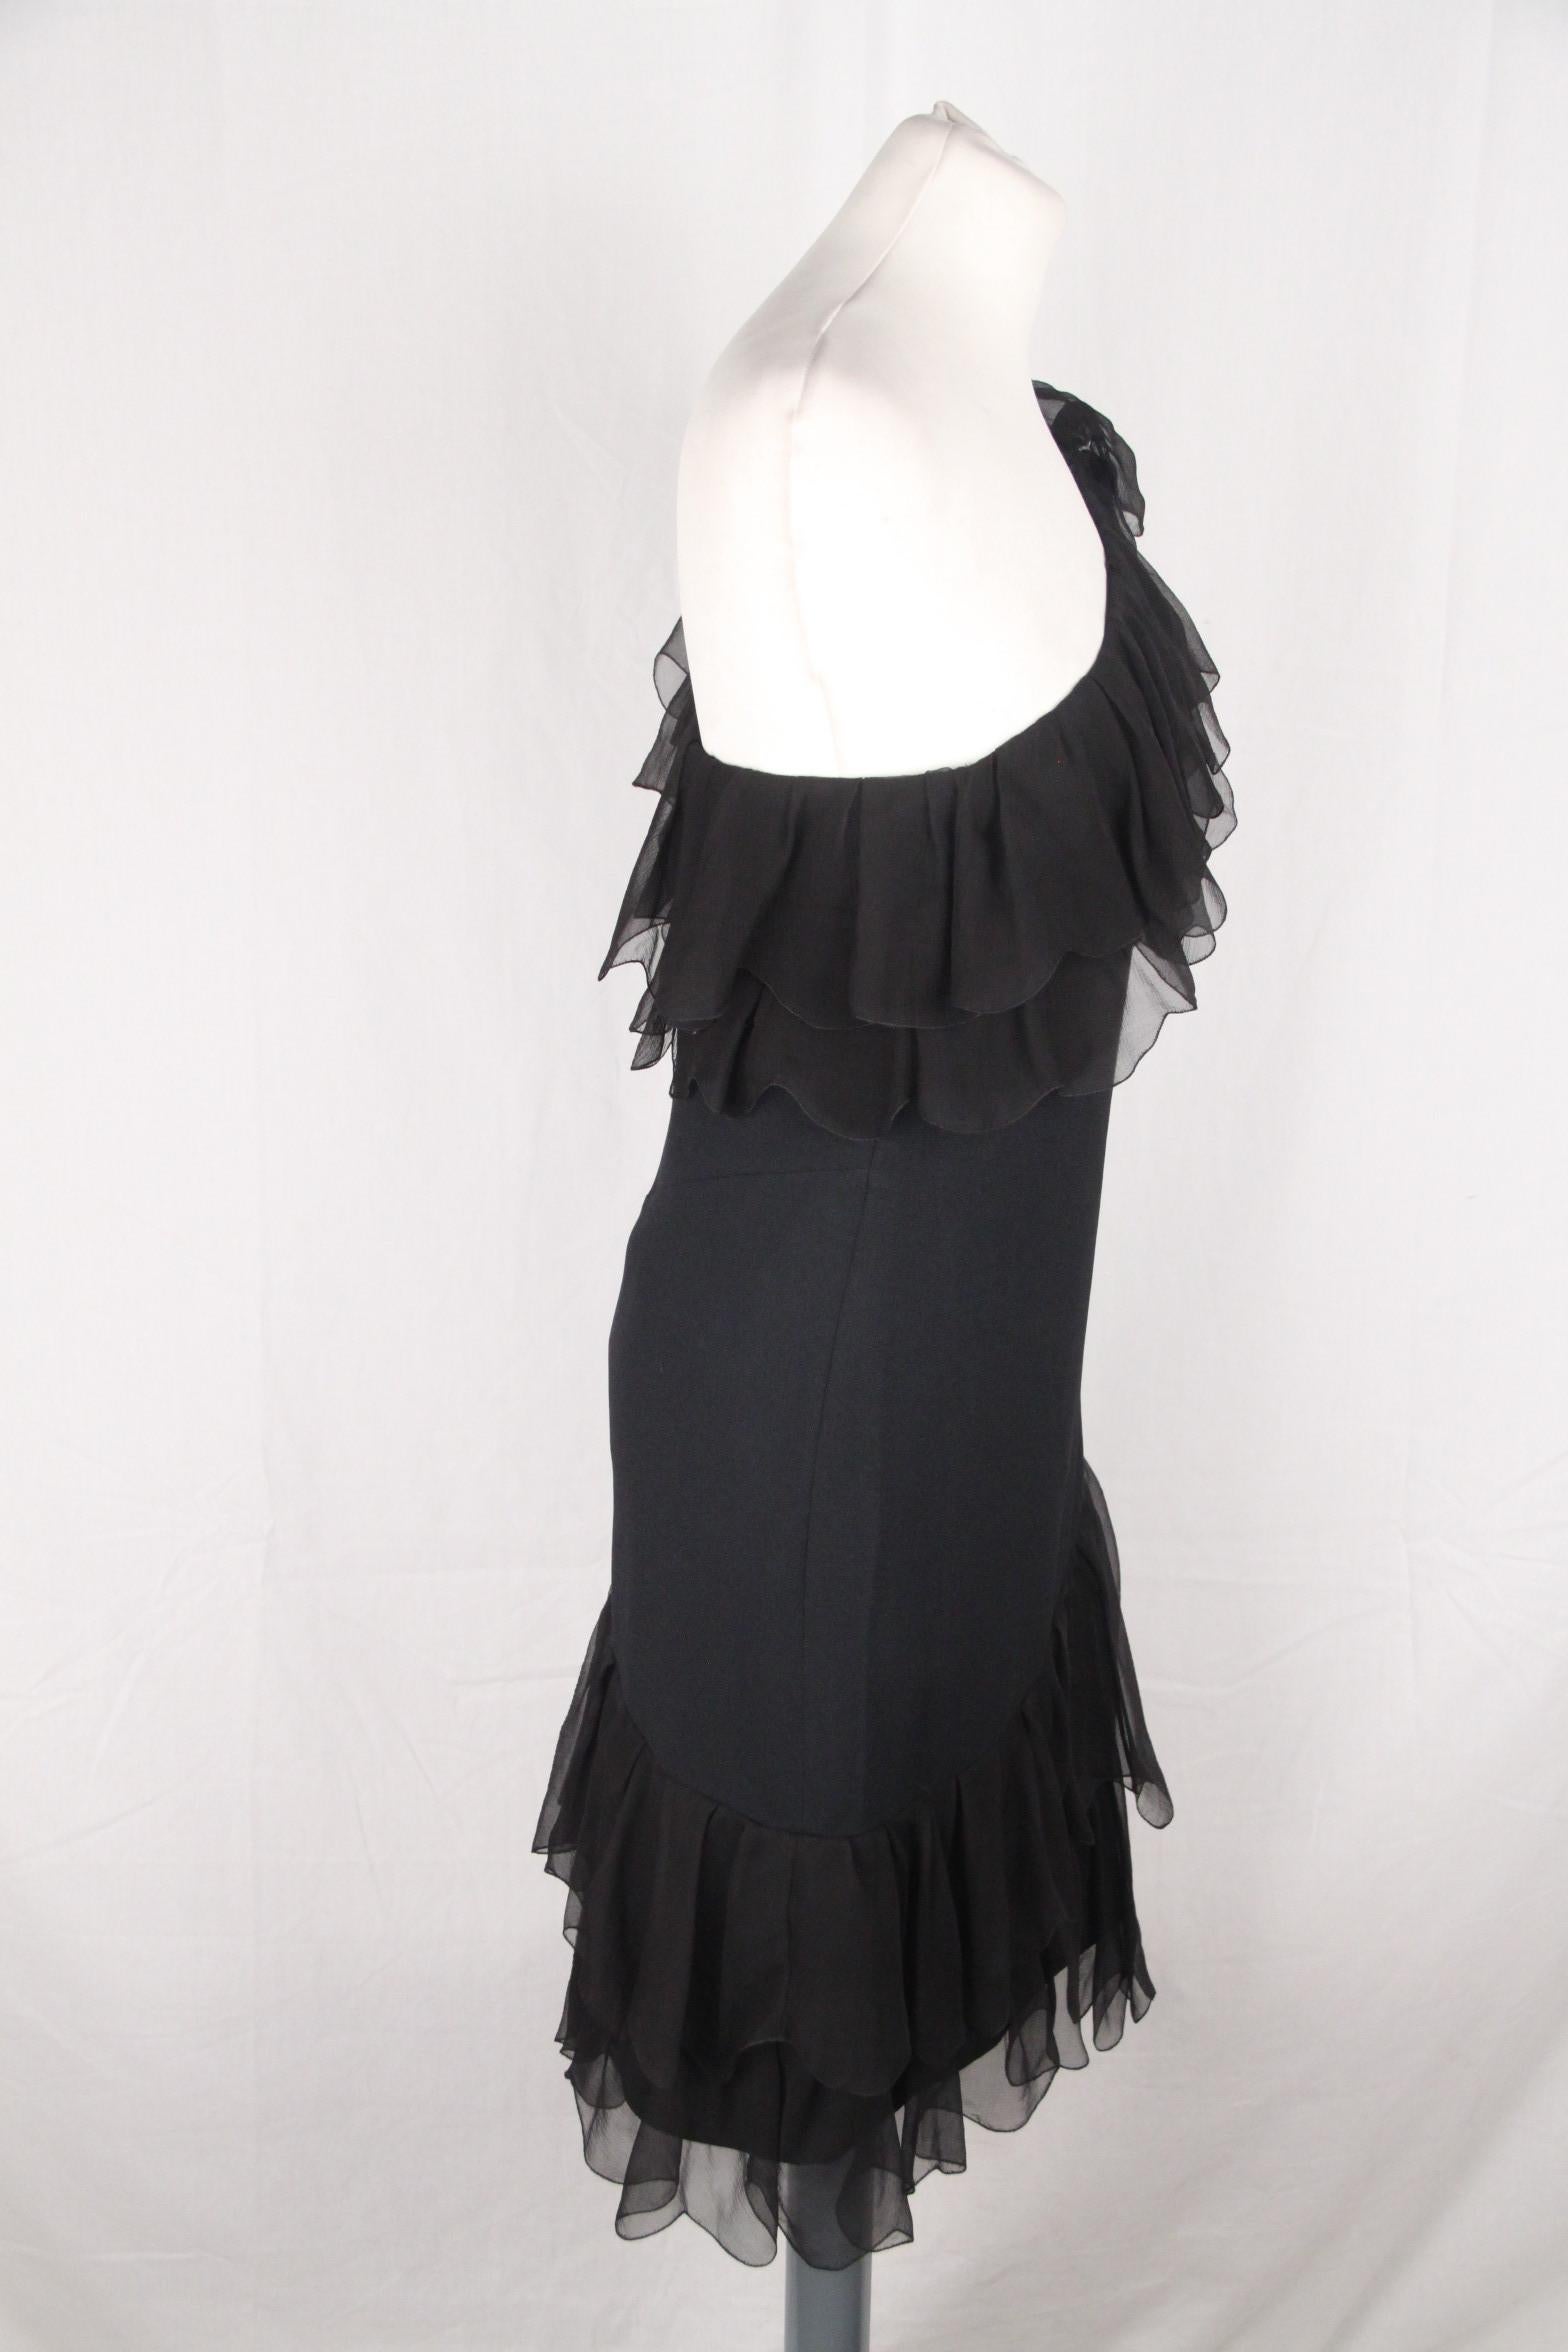 Christian Dior Black One Shoulder Dress with Ruffles Size 4 In Excellent Condition In Rome, Rome